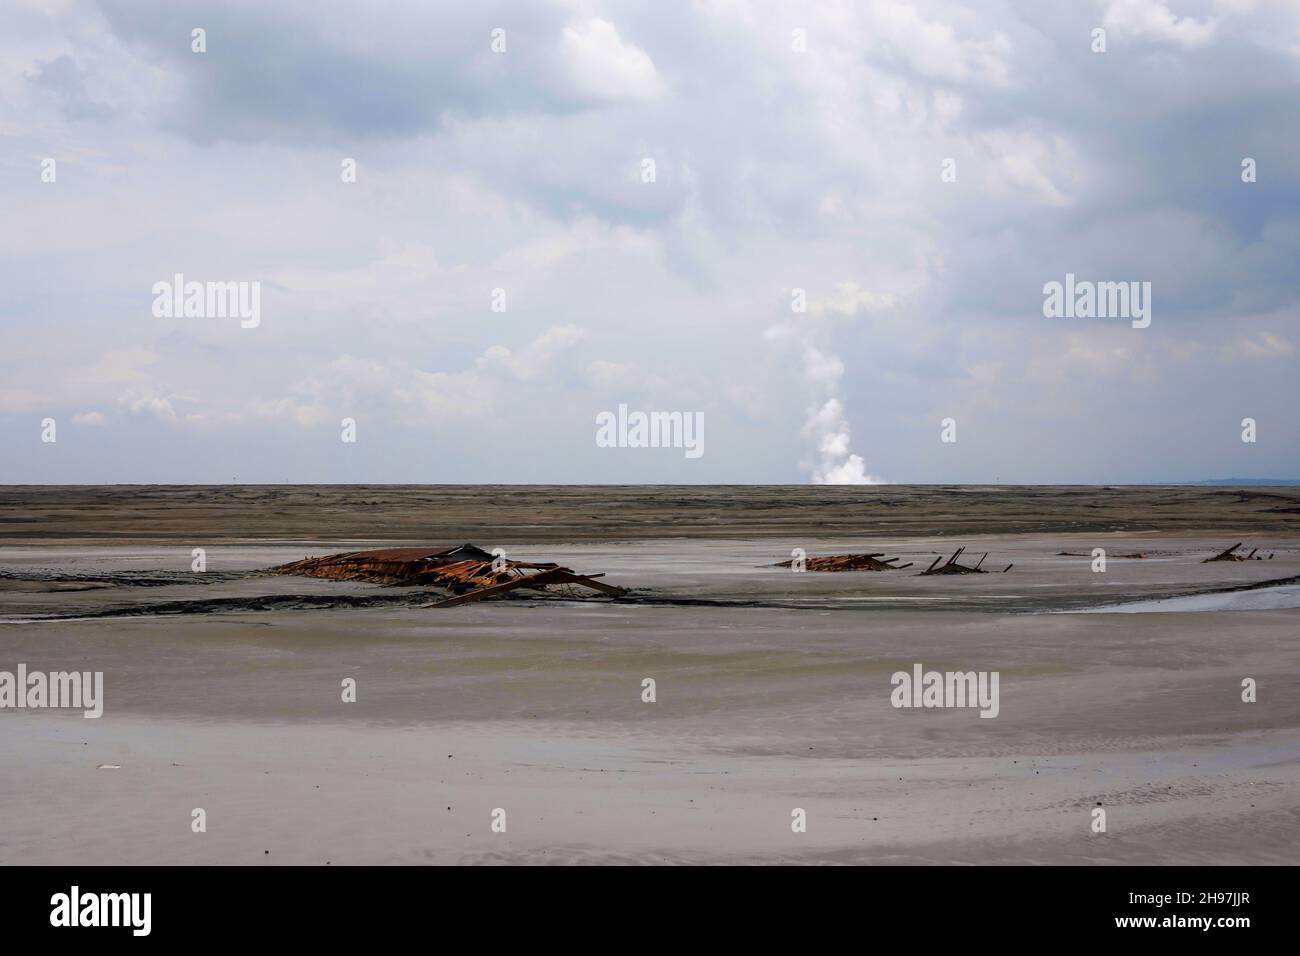 Lake of dry mud formed from a mud volcano eruption in Sidoarjo, Indonesia. Clouds in blue sky. Natural disaster in oil and gas industry. No people. Stock Photo